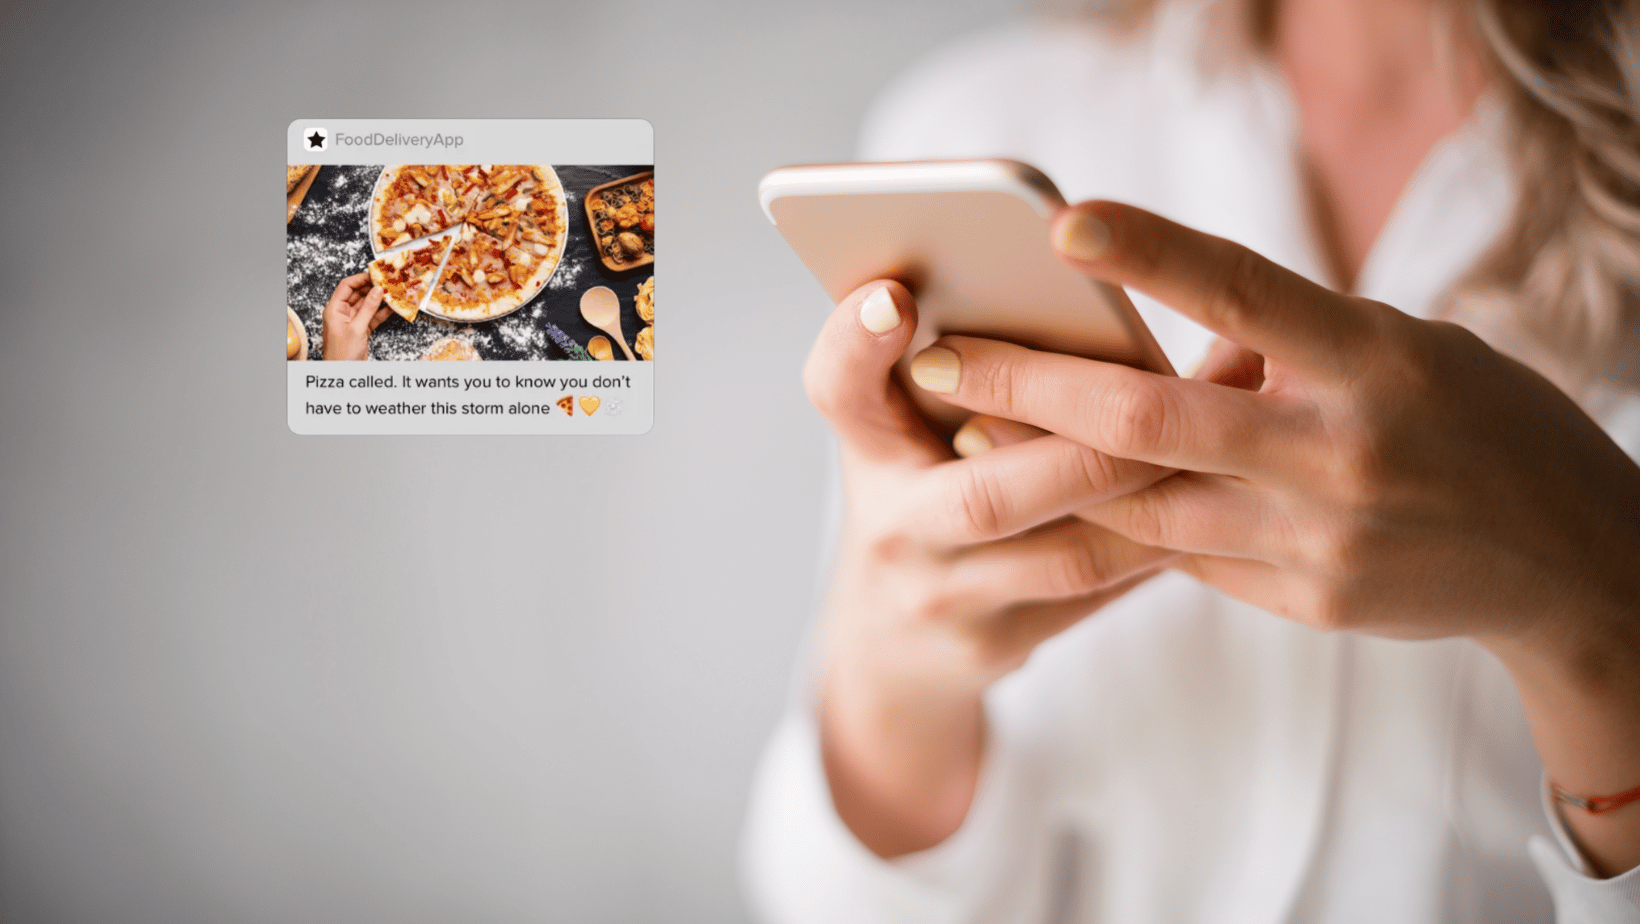 Girl holding phone gets push notification from pizza estaurant.